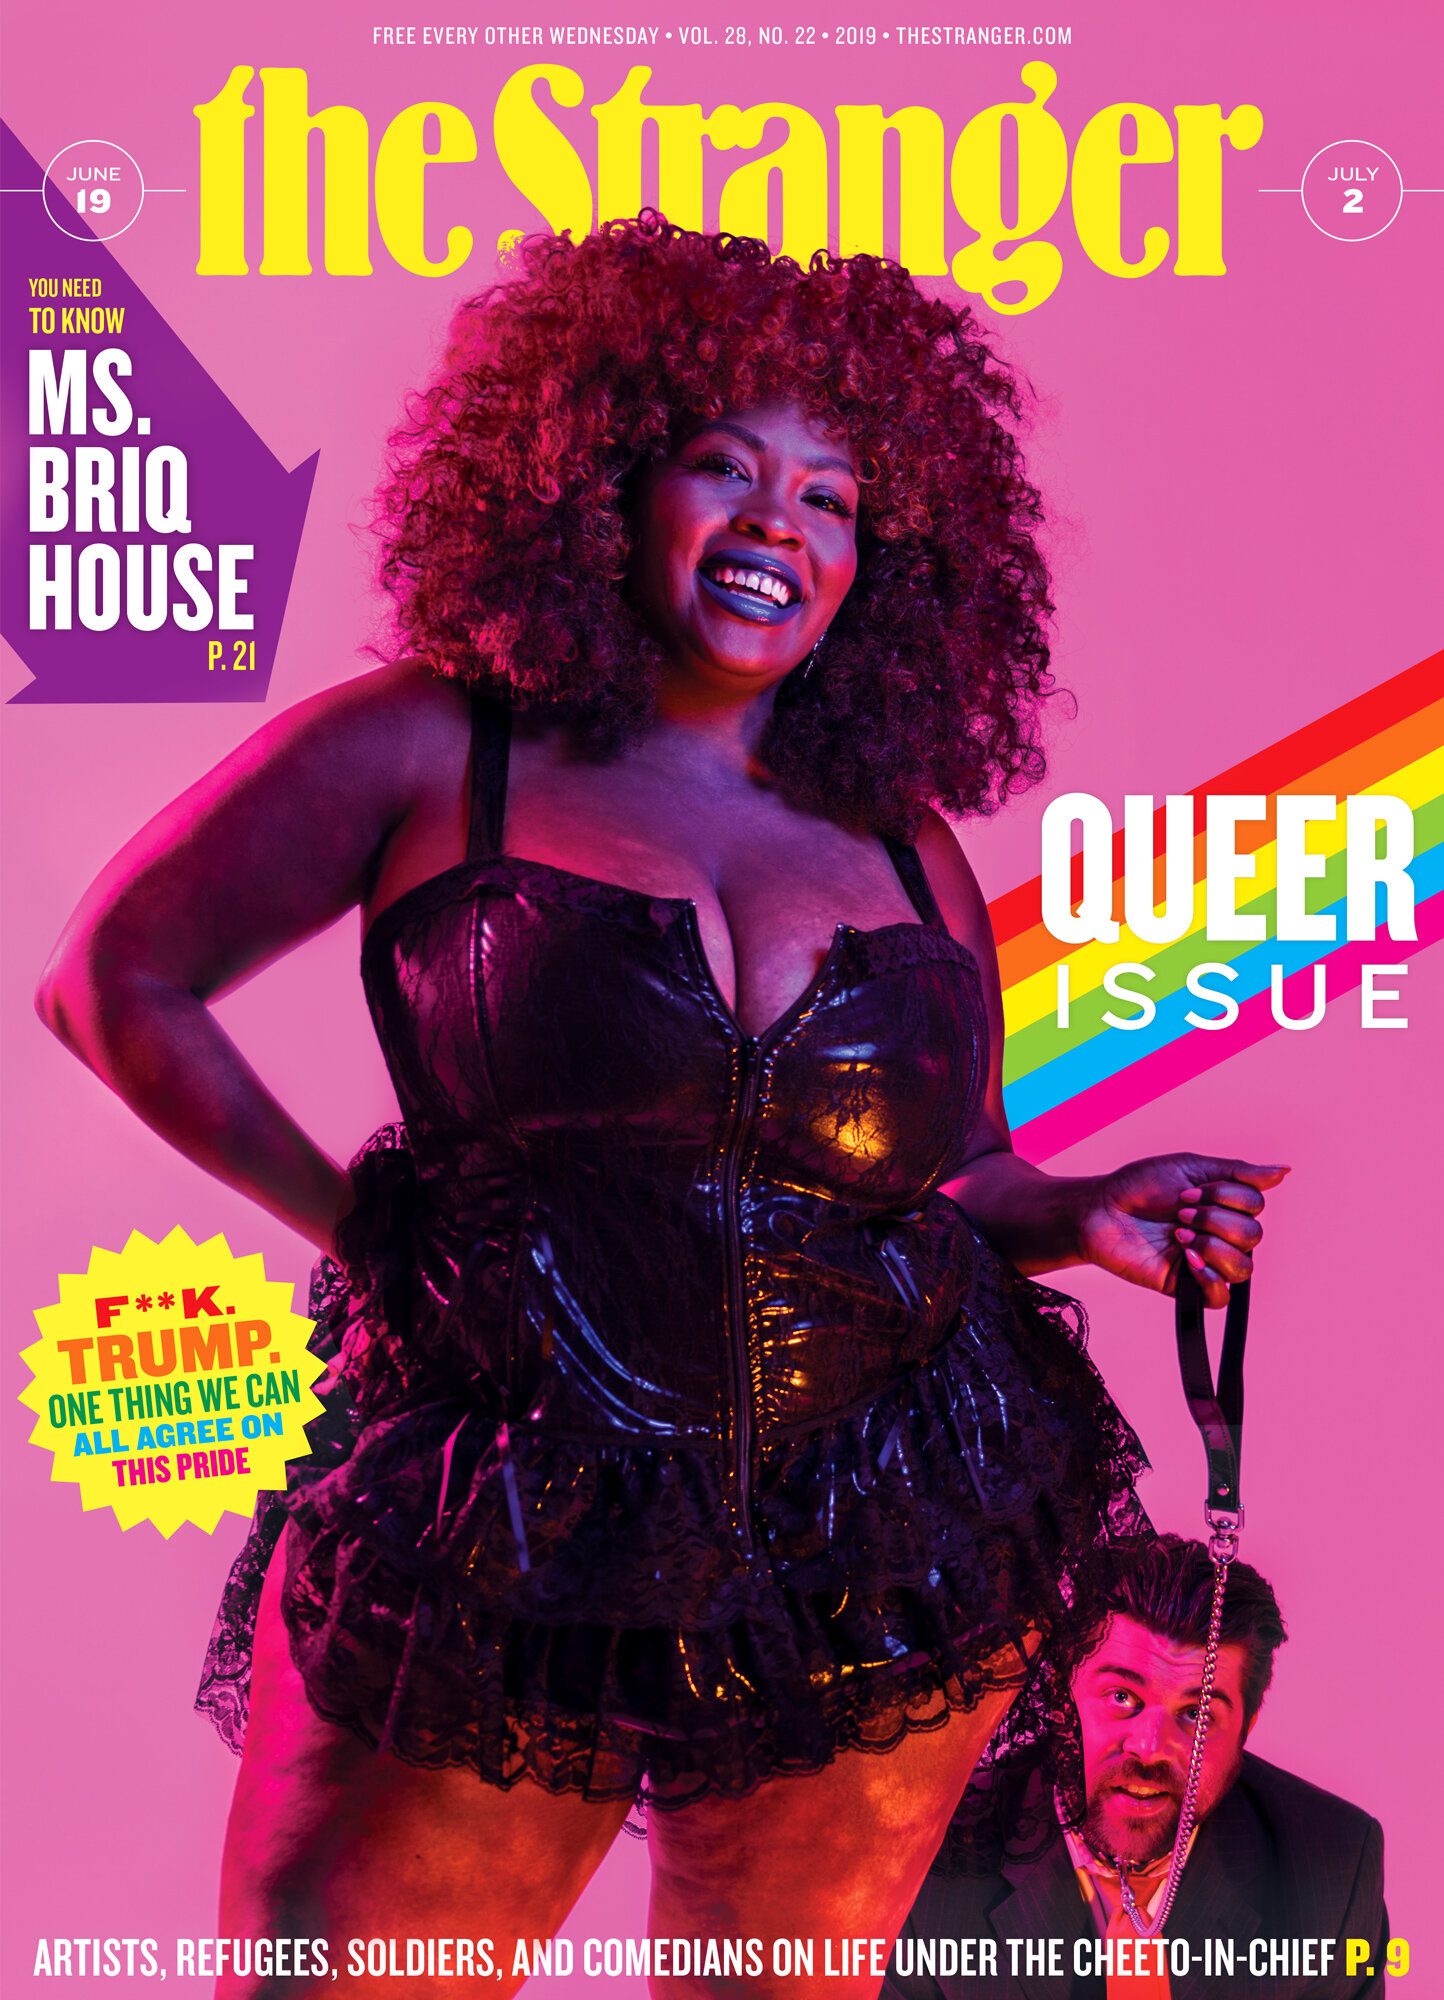 Ms Briq House for The Stranger's annual Queer issue